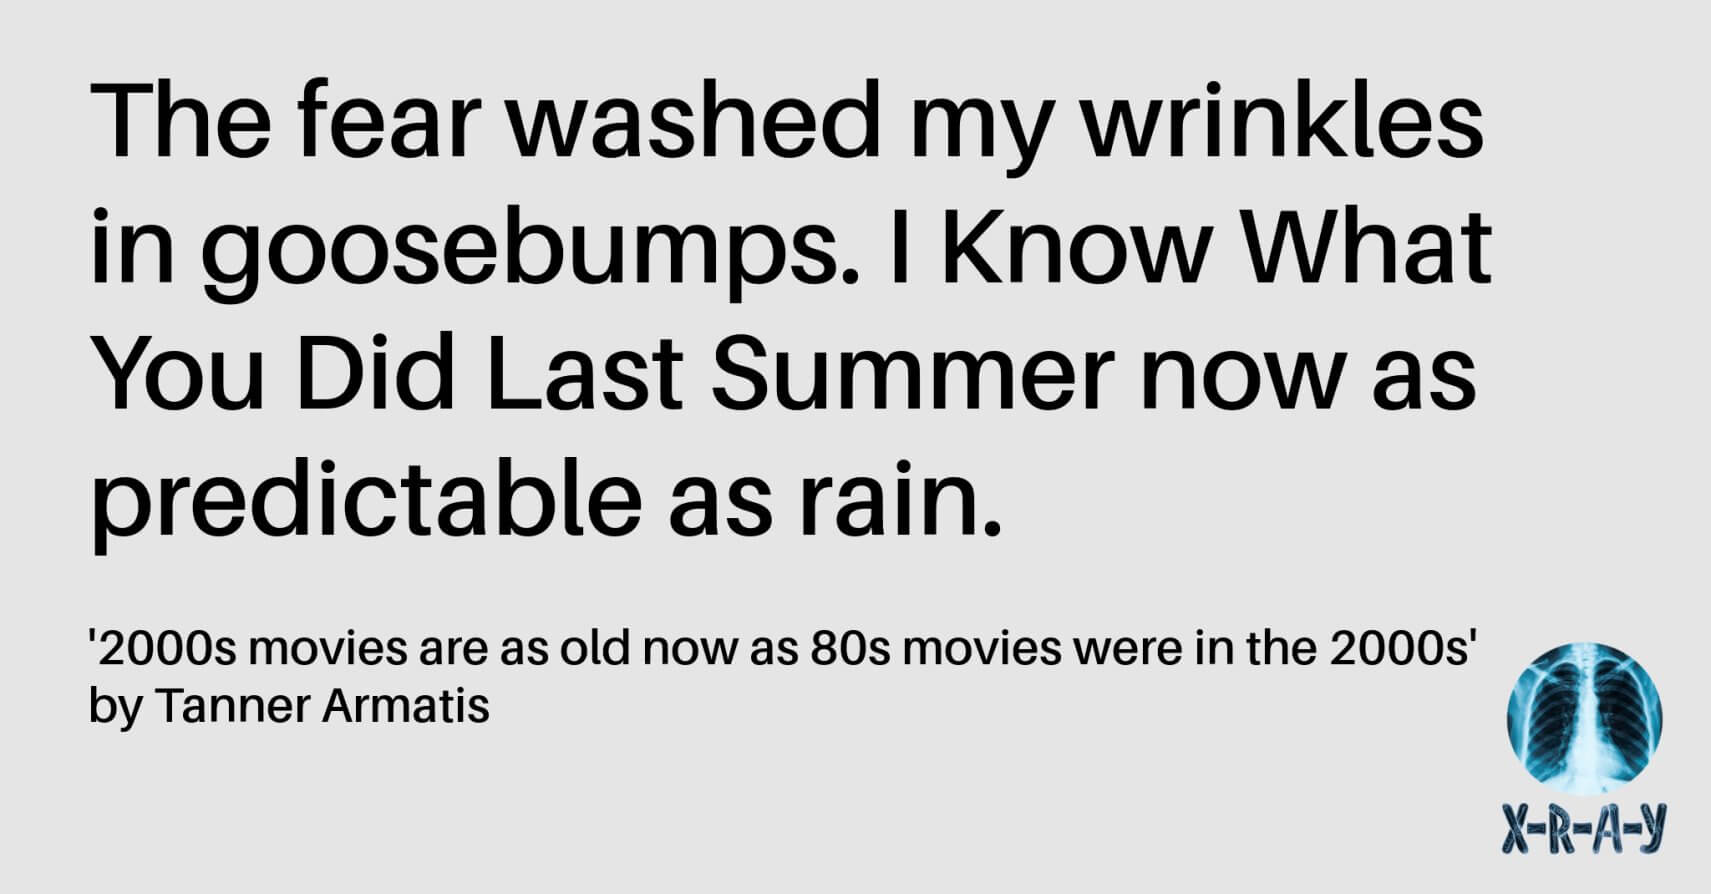 2000s MOVIES ARE AS OLD NOW AS 80s MOVIES WERE IN THE 2000s by Tanner Armatis